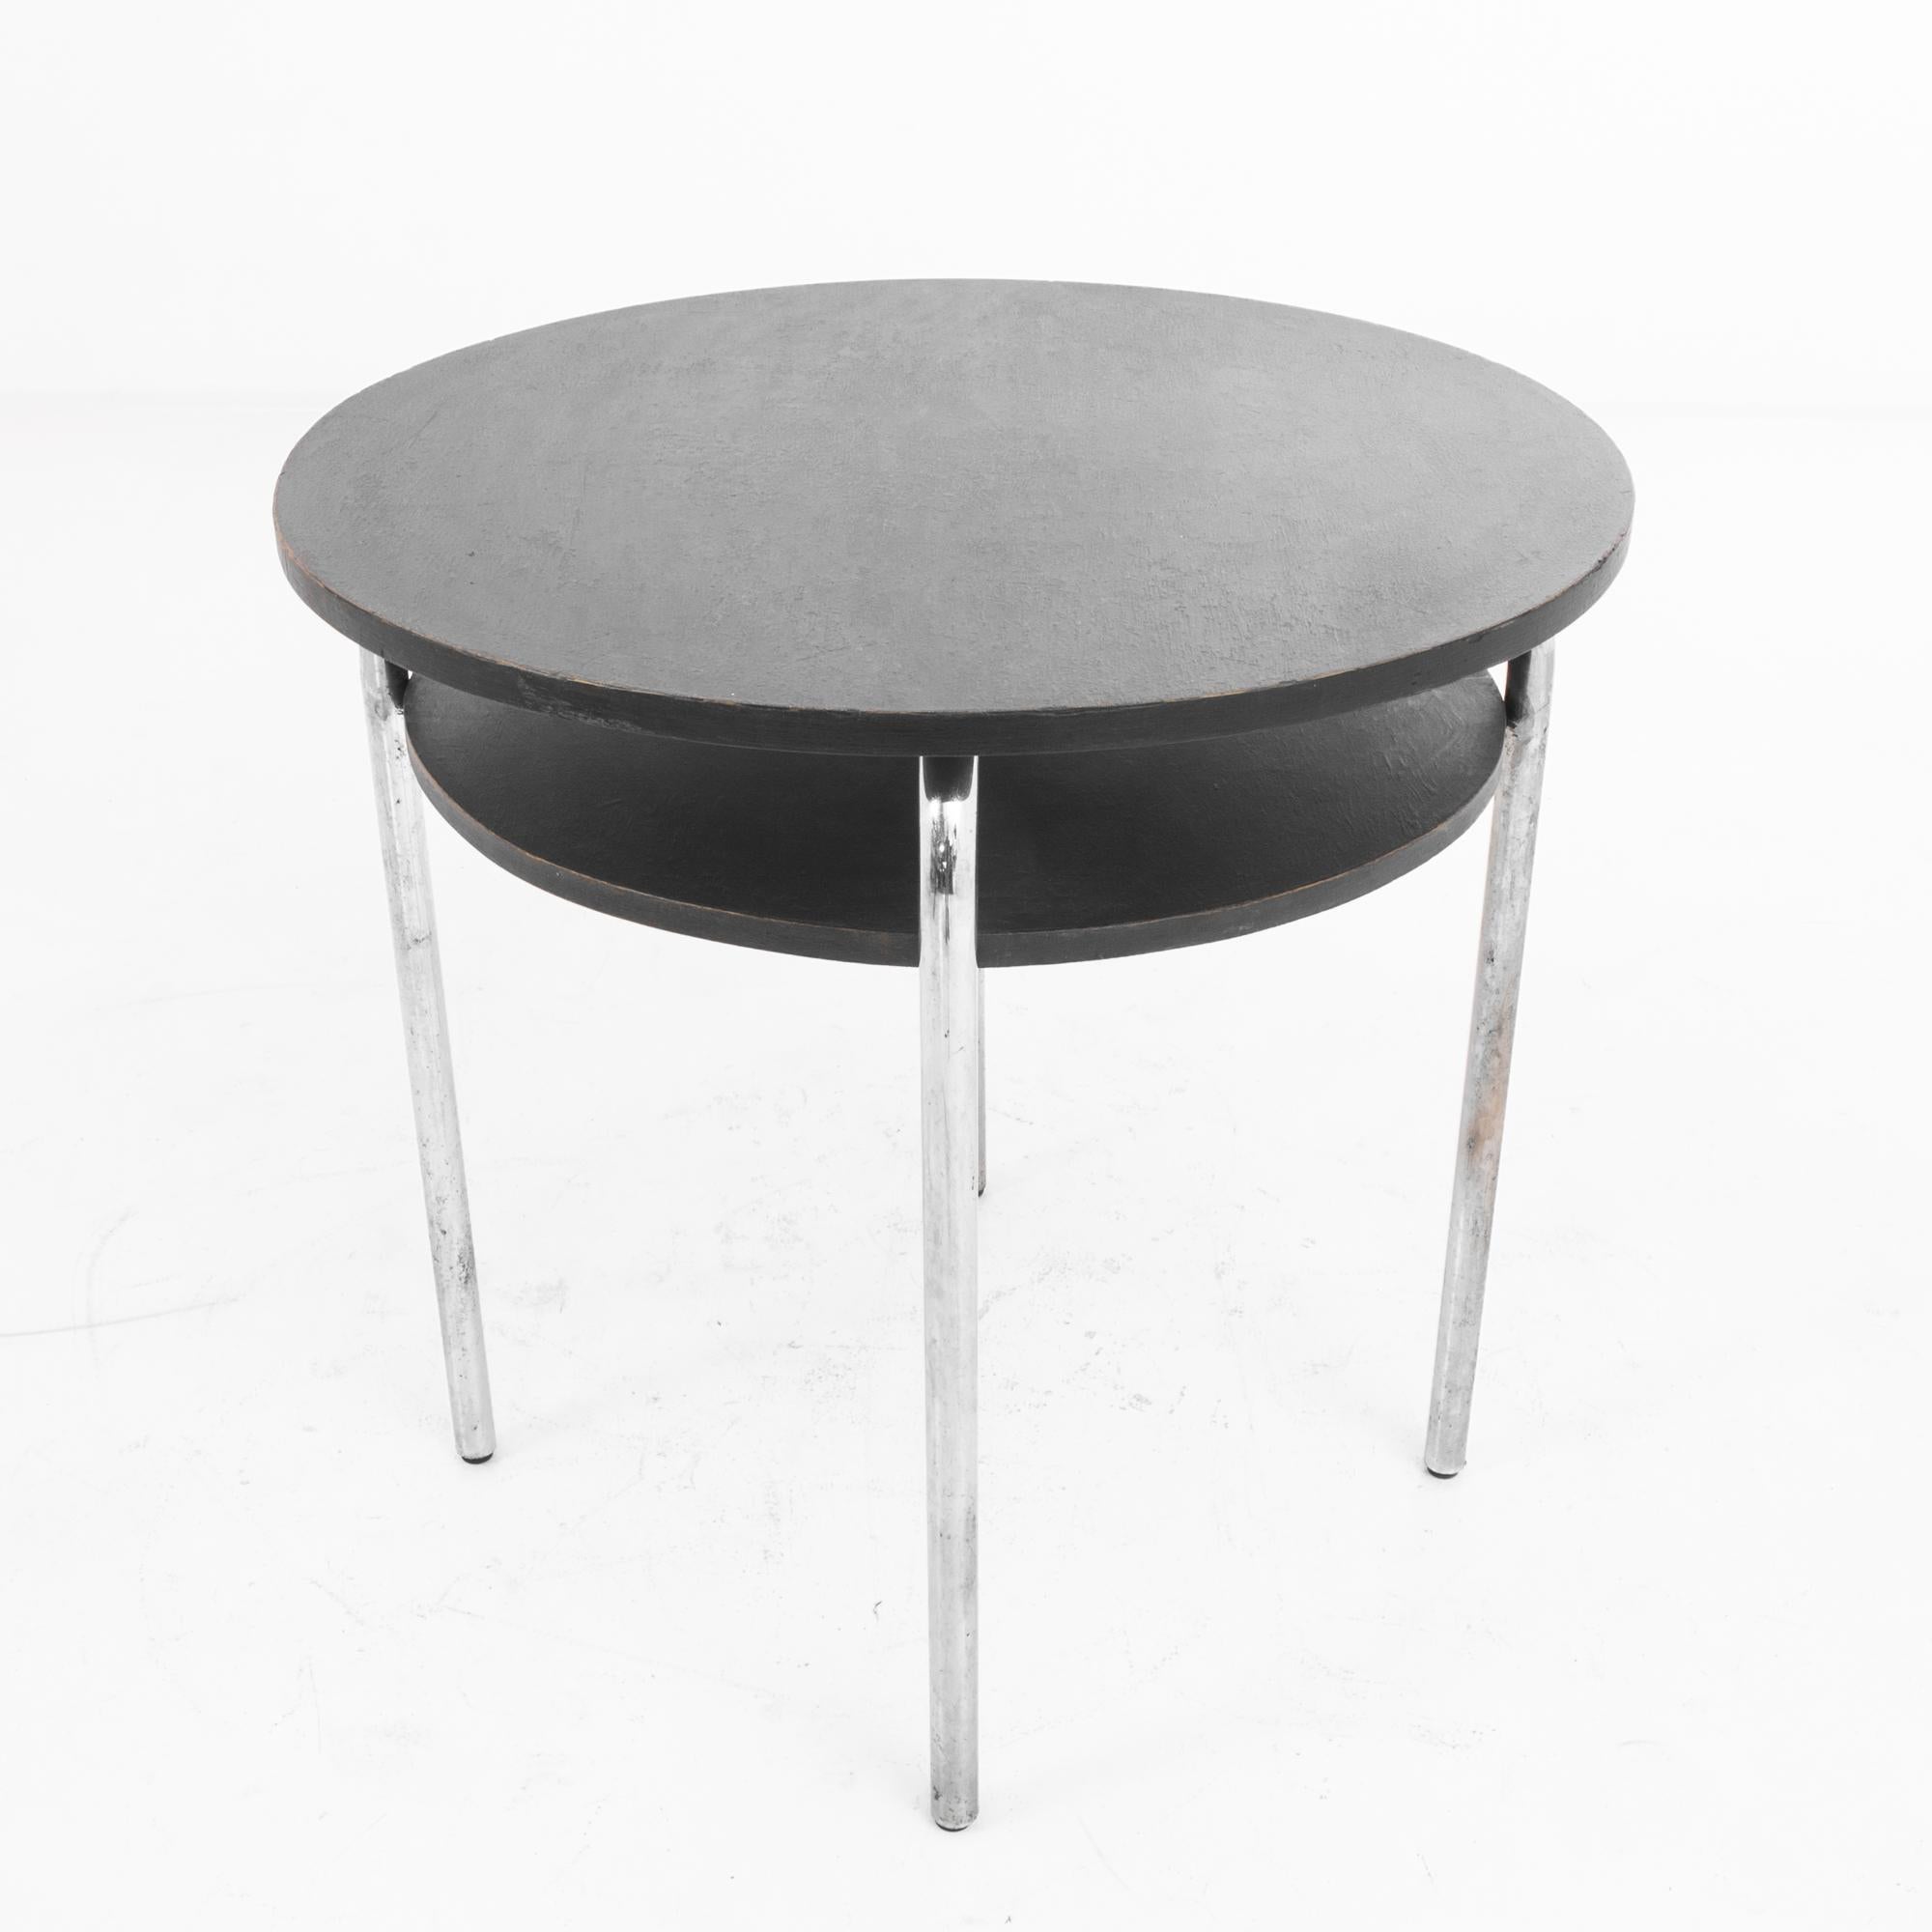 1970s German Metal Round Side Table with Wooden Top 1